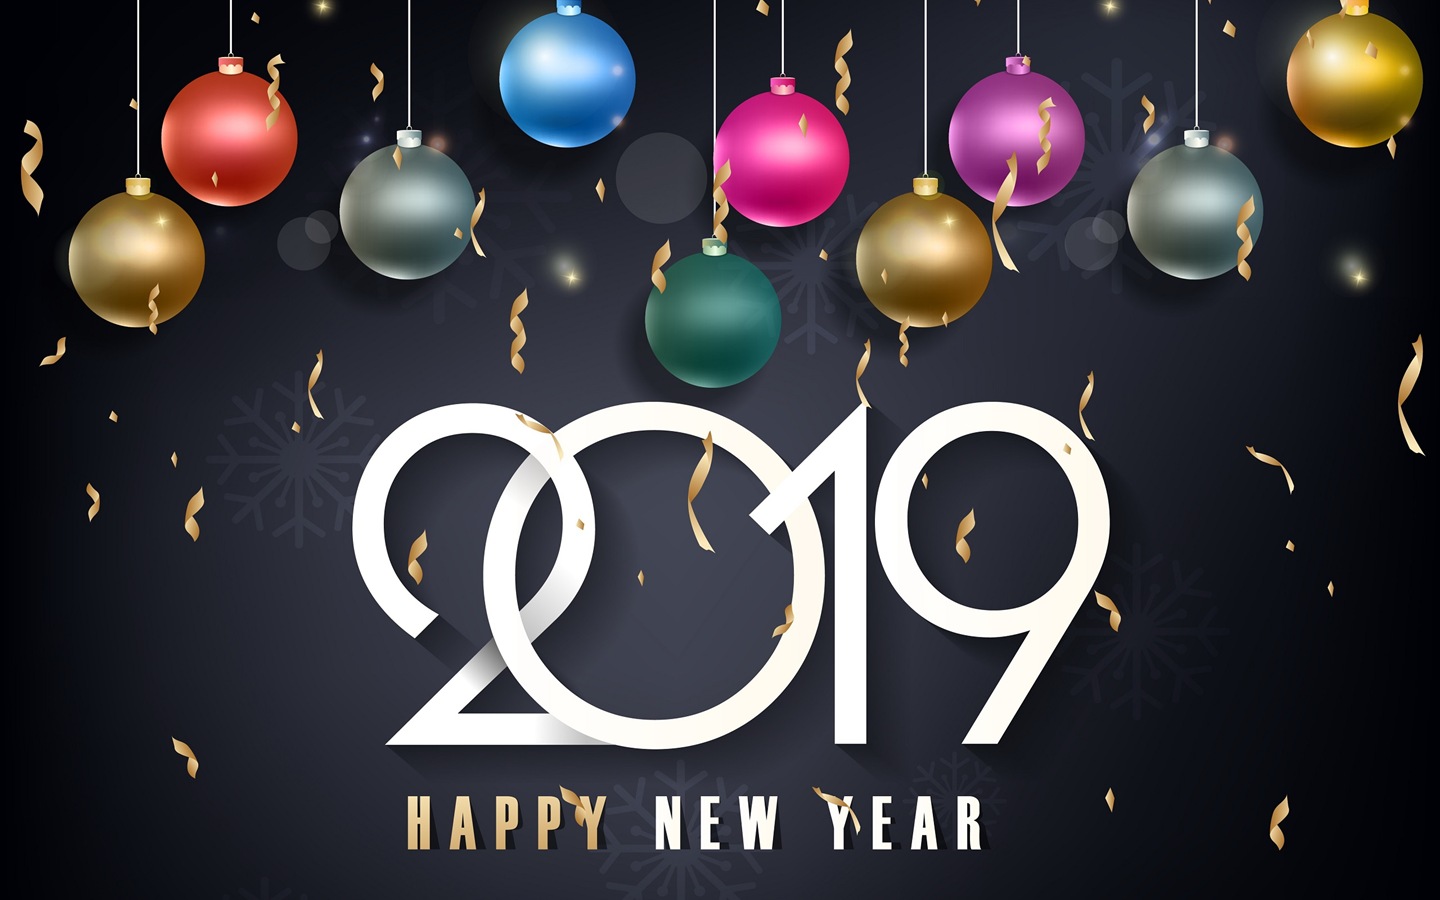 Happy New Year 2019 HD wallpapers #9 - 1440x900